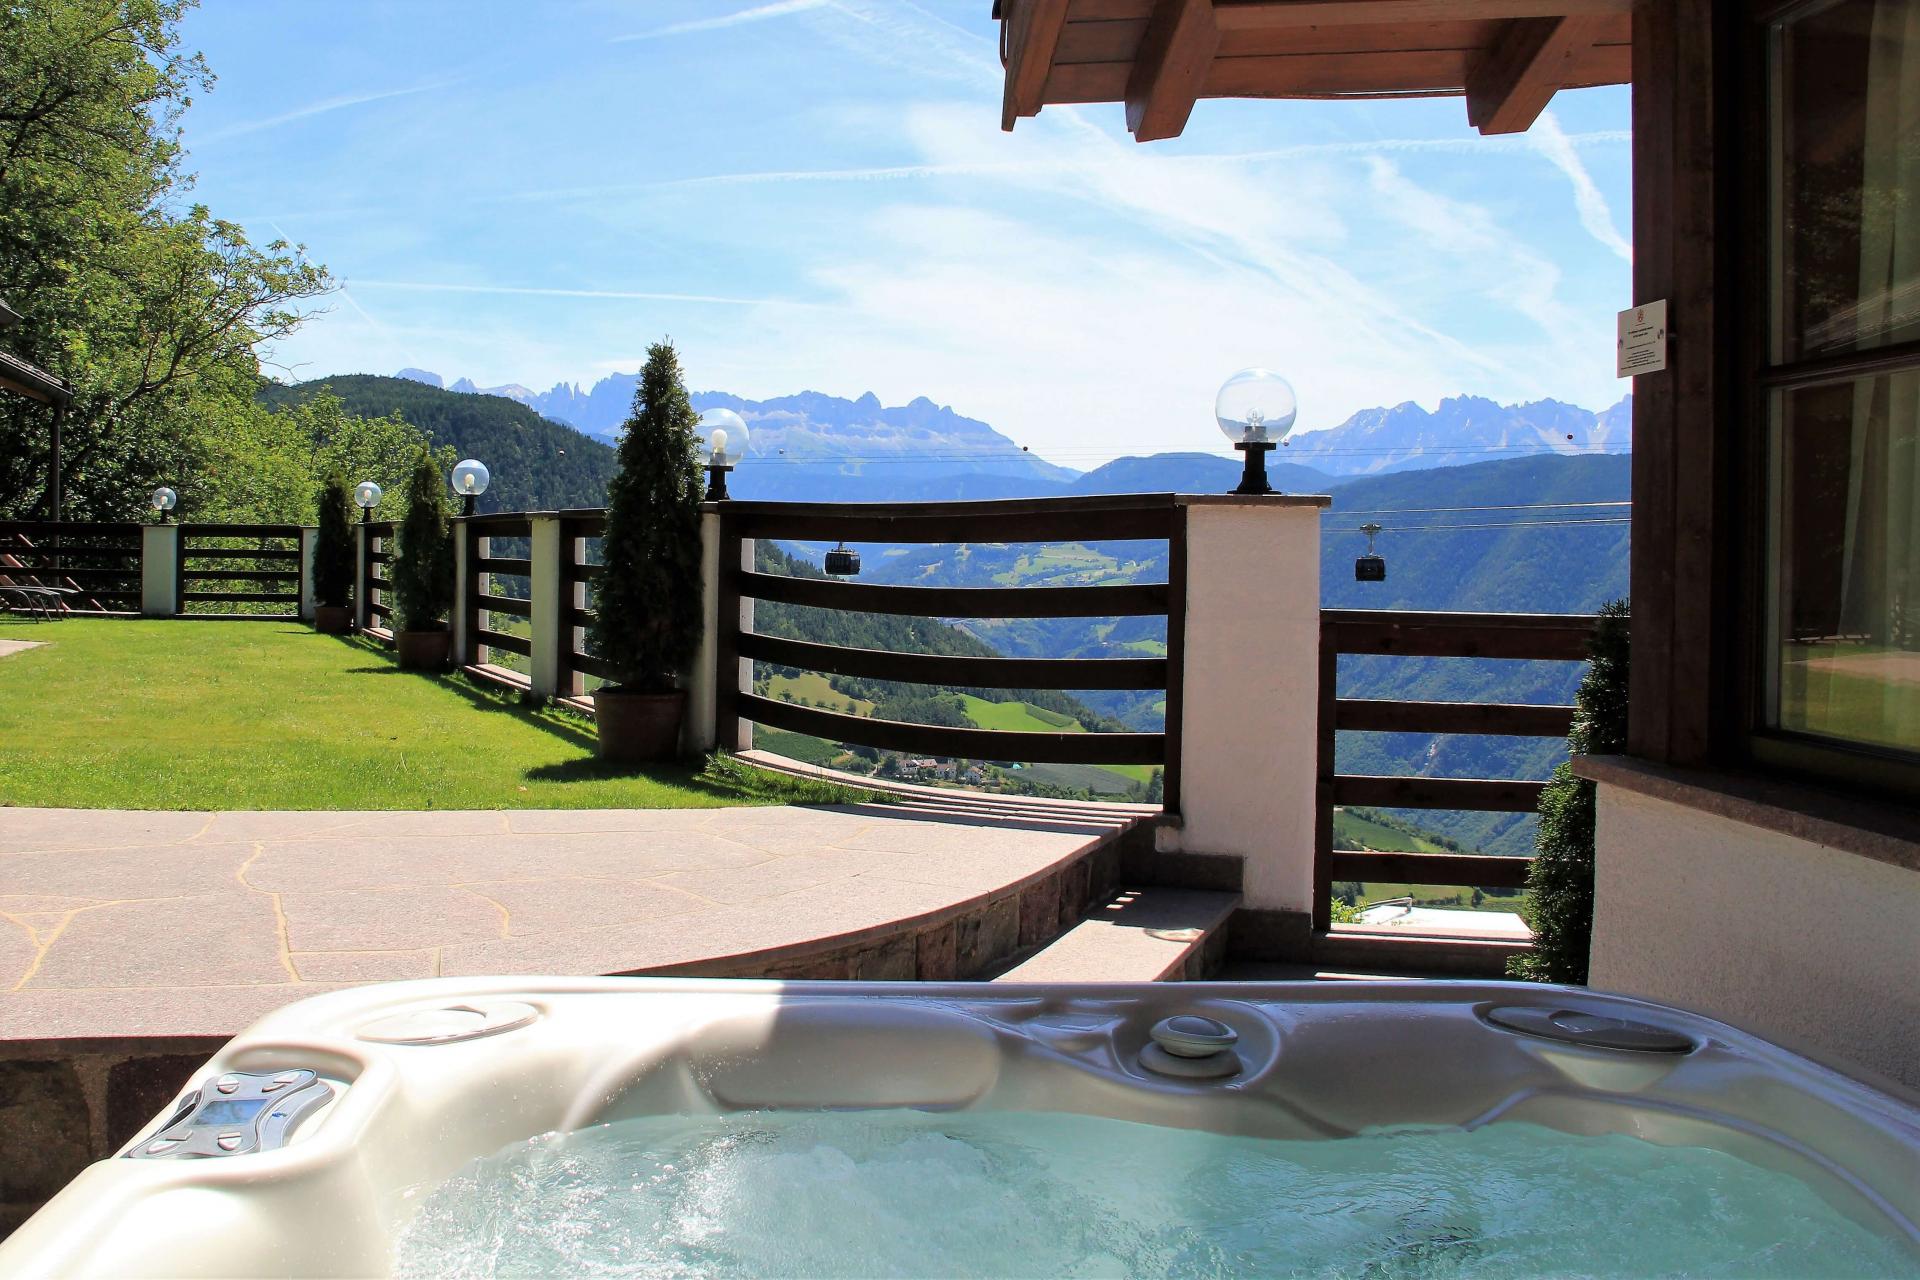 Catered Chalet Dream Holiday Home in the Dolomites Whirlpool Water Panorama View Mountains